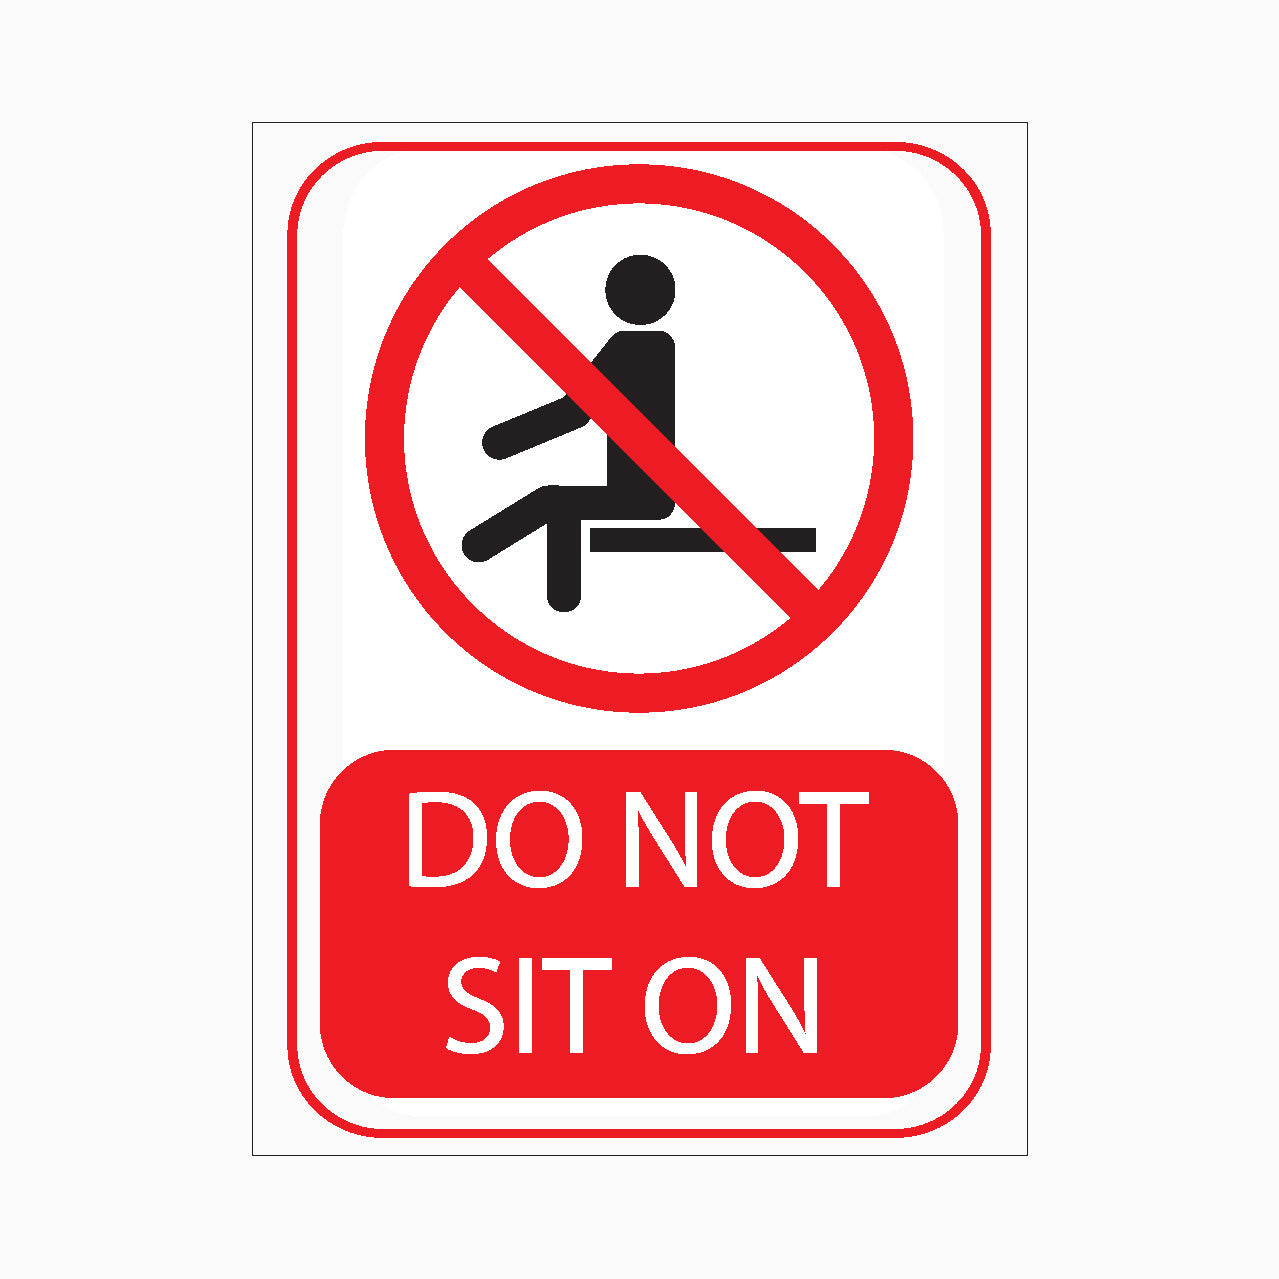  DO NOT SIT ON SIGN - prohibition sign